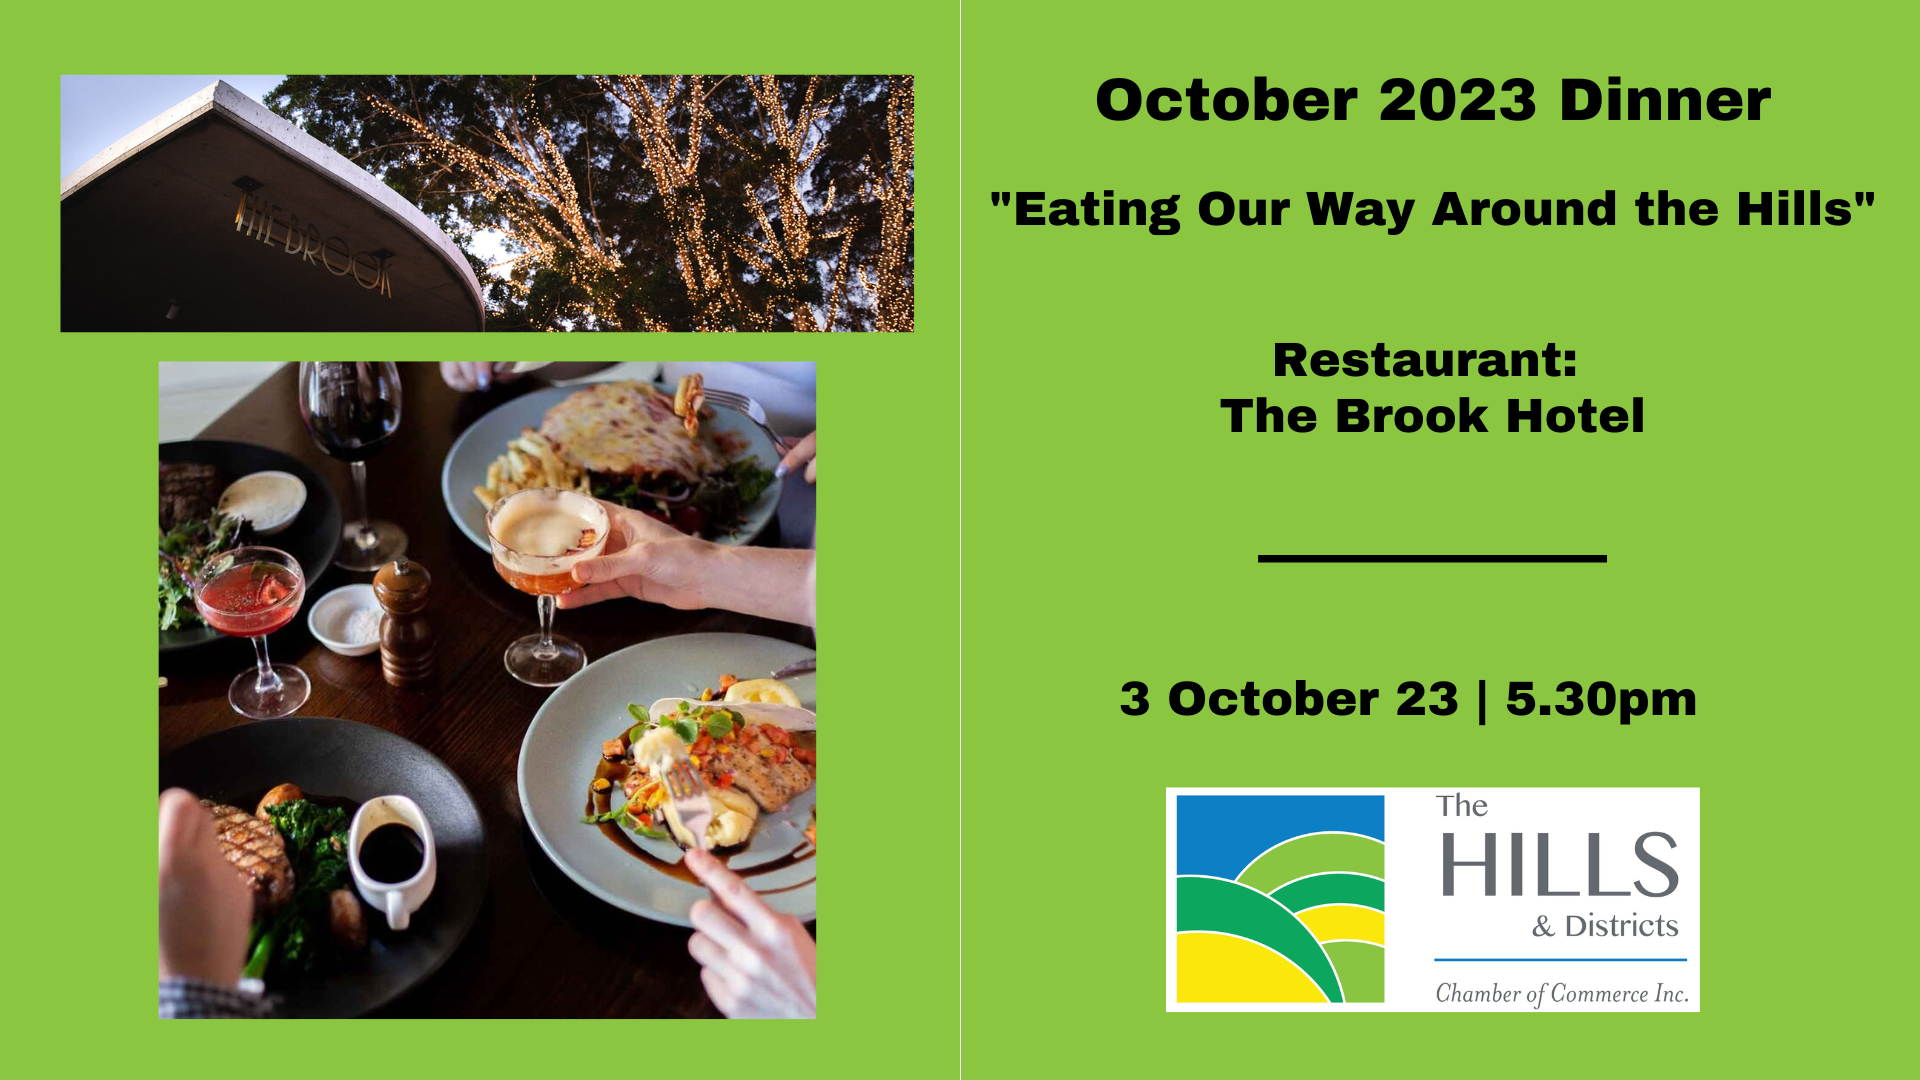 Dinners » October 2023 “Eating Our Way Around the Hills”